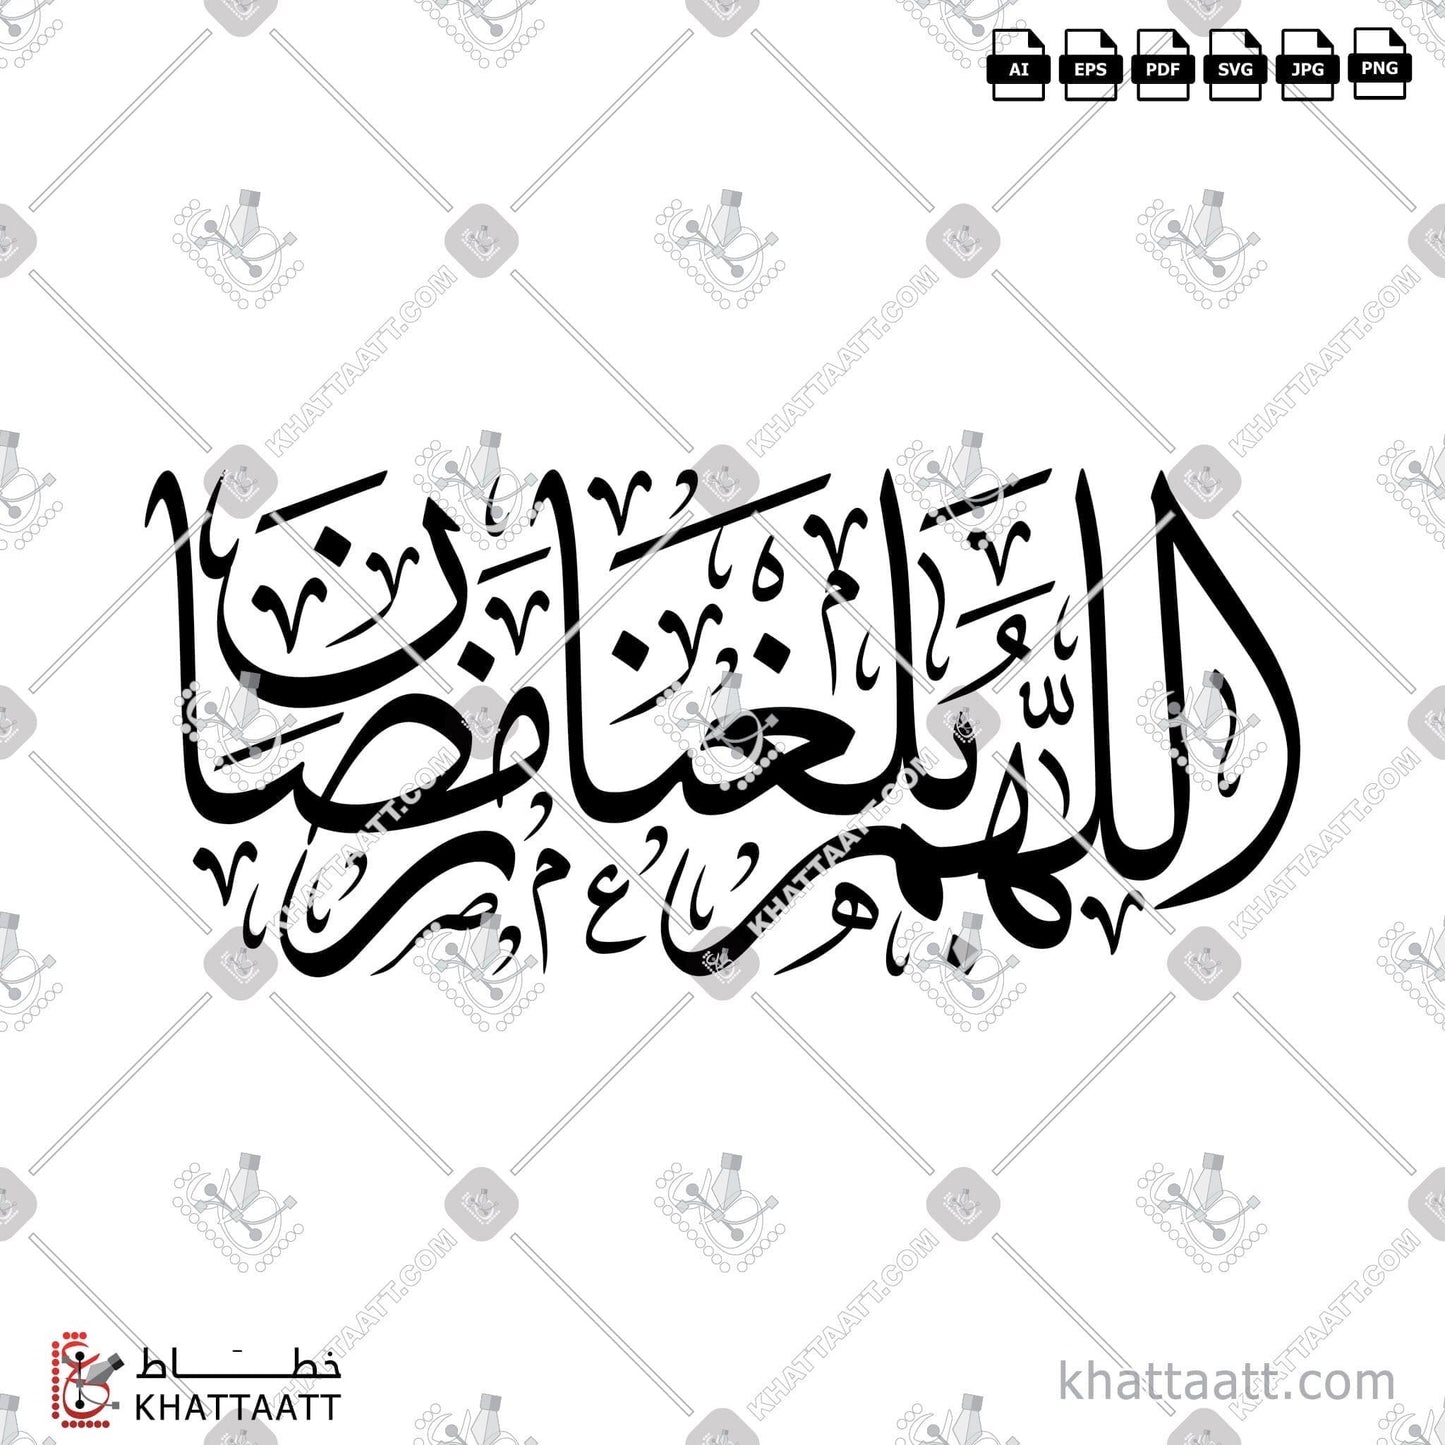 Download Arabic Calligraphy of اللهم بلغنا رمضان in Thuluth - خط الثلث in vector and .png